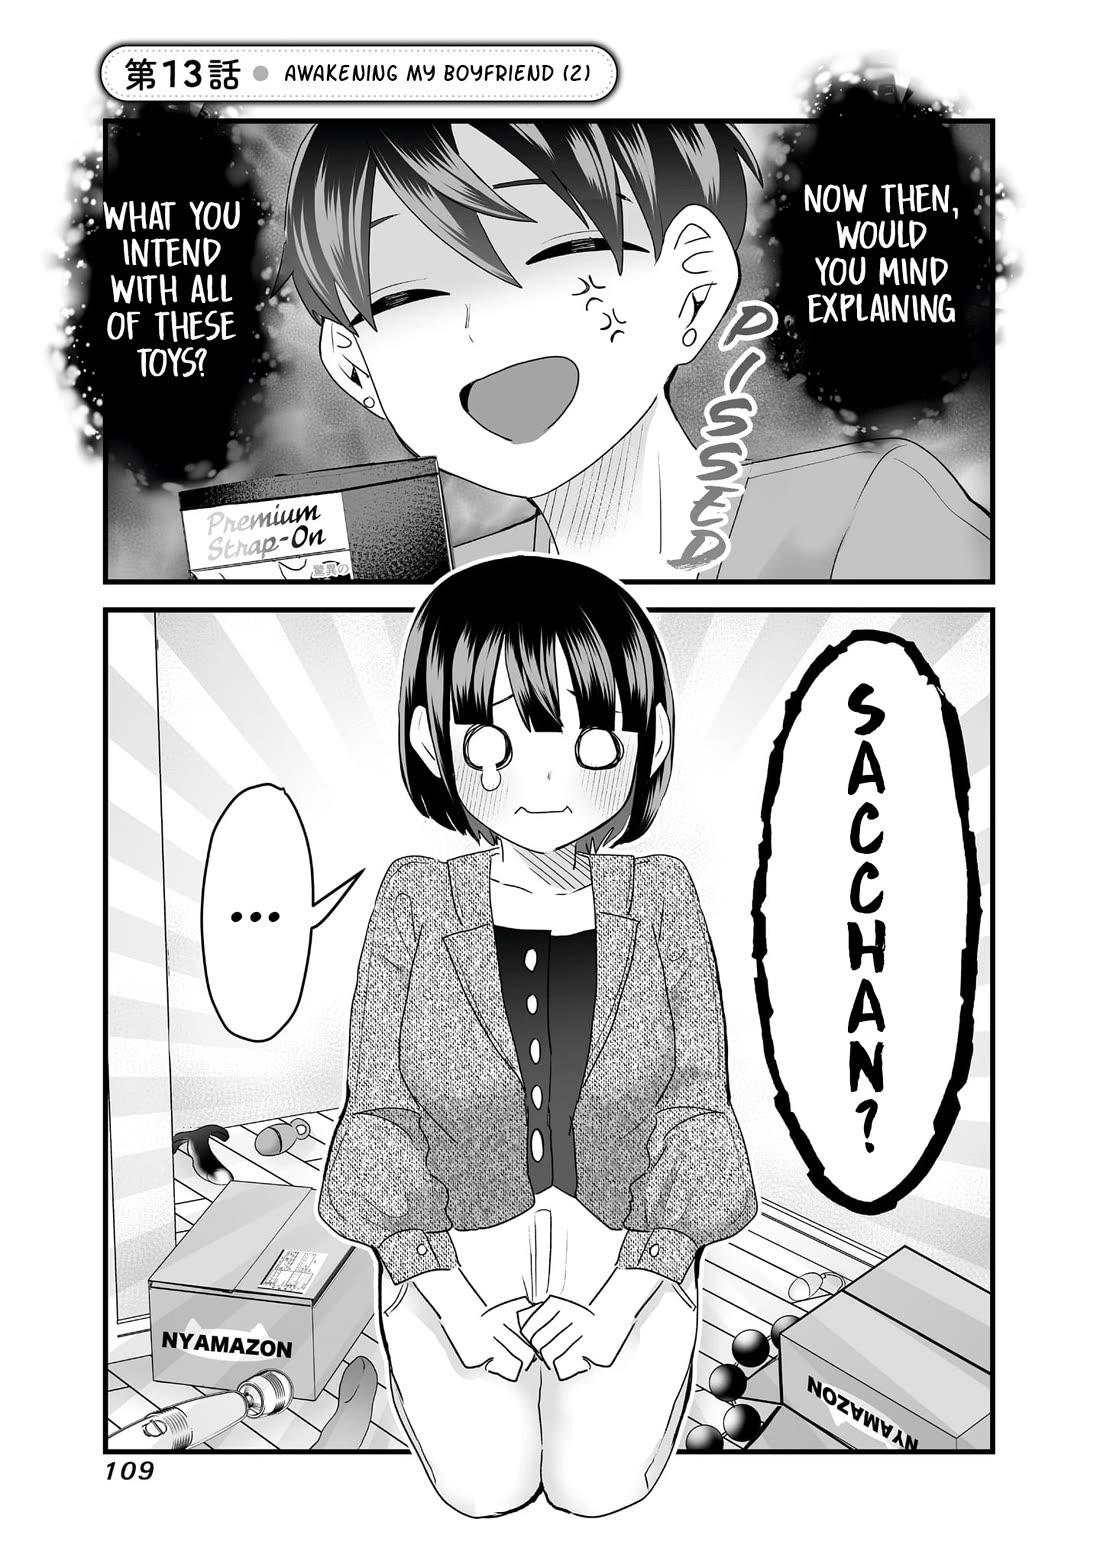 Sacchan and Ken-chan Are Going at it Again - chapter 13 - #1